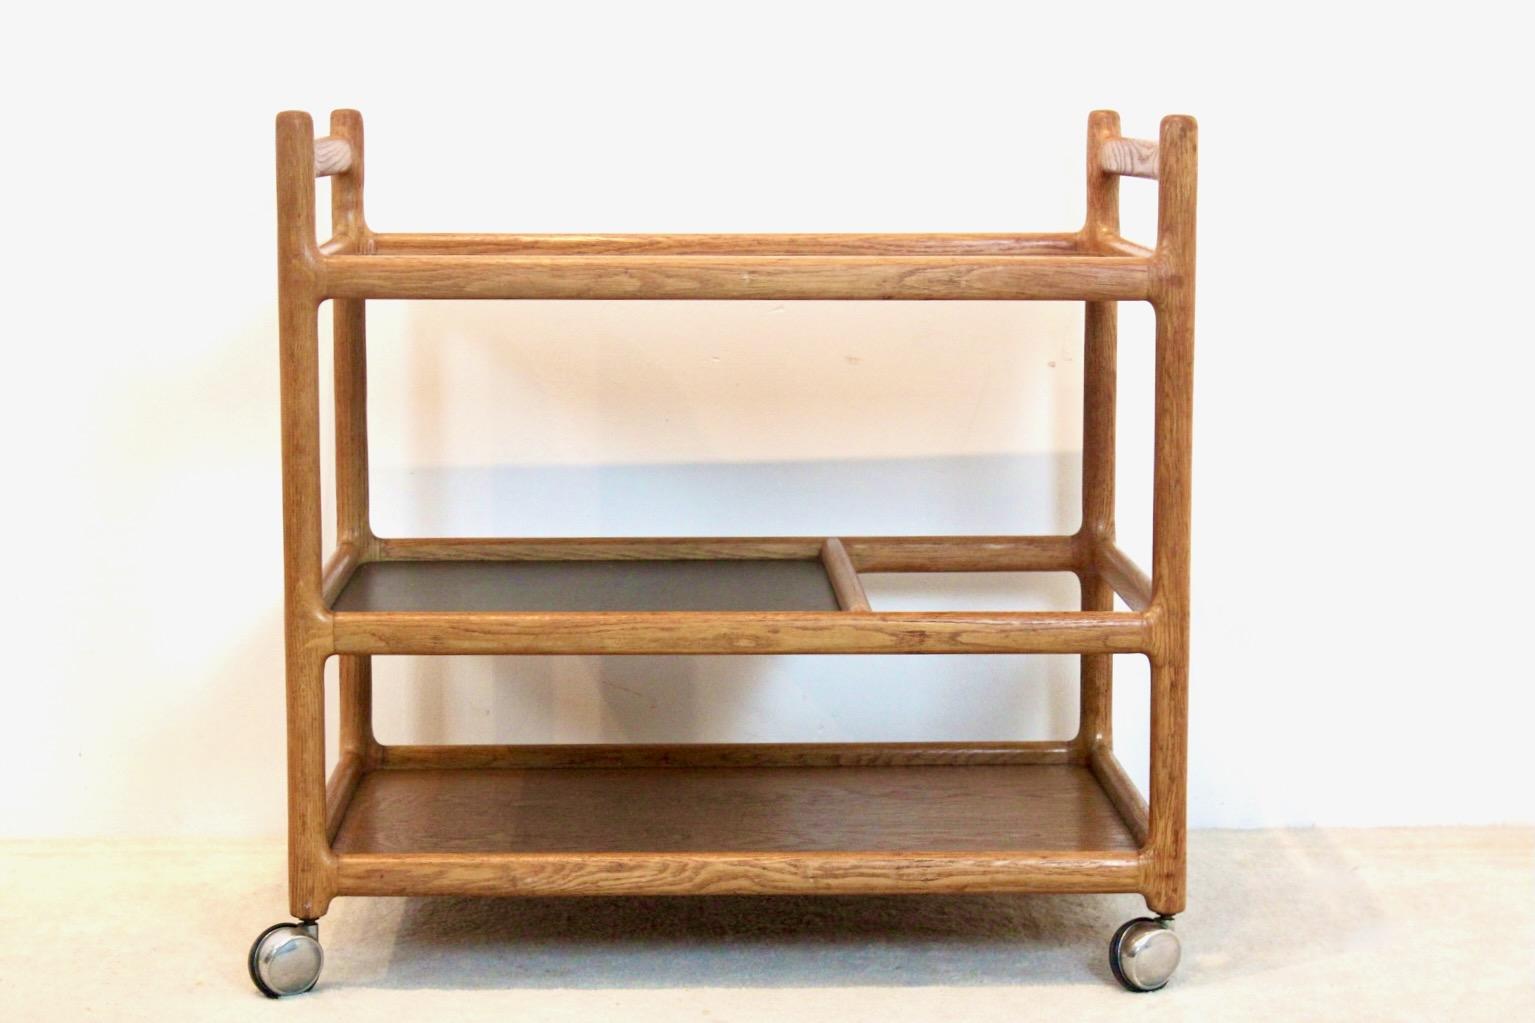 Magnificent Oak trolley designed by Korch Henning. Produced by CFC Silkeborg Møbelfabrik in Denmark. This bar and serving cart is made from solid oak and one black laminate tray, riding on fully working chromed casters. Excellent and original